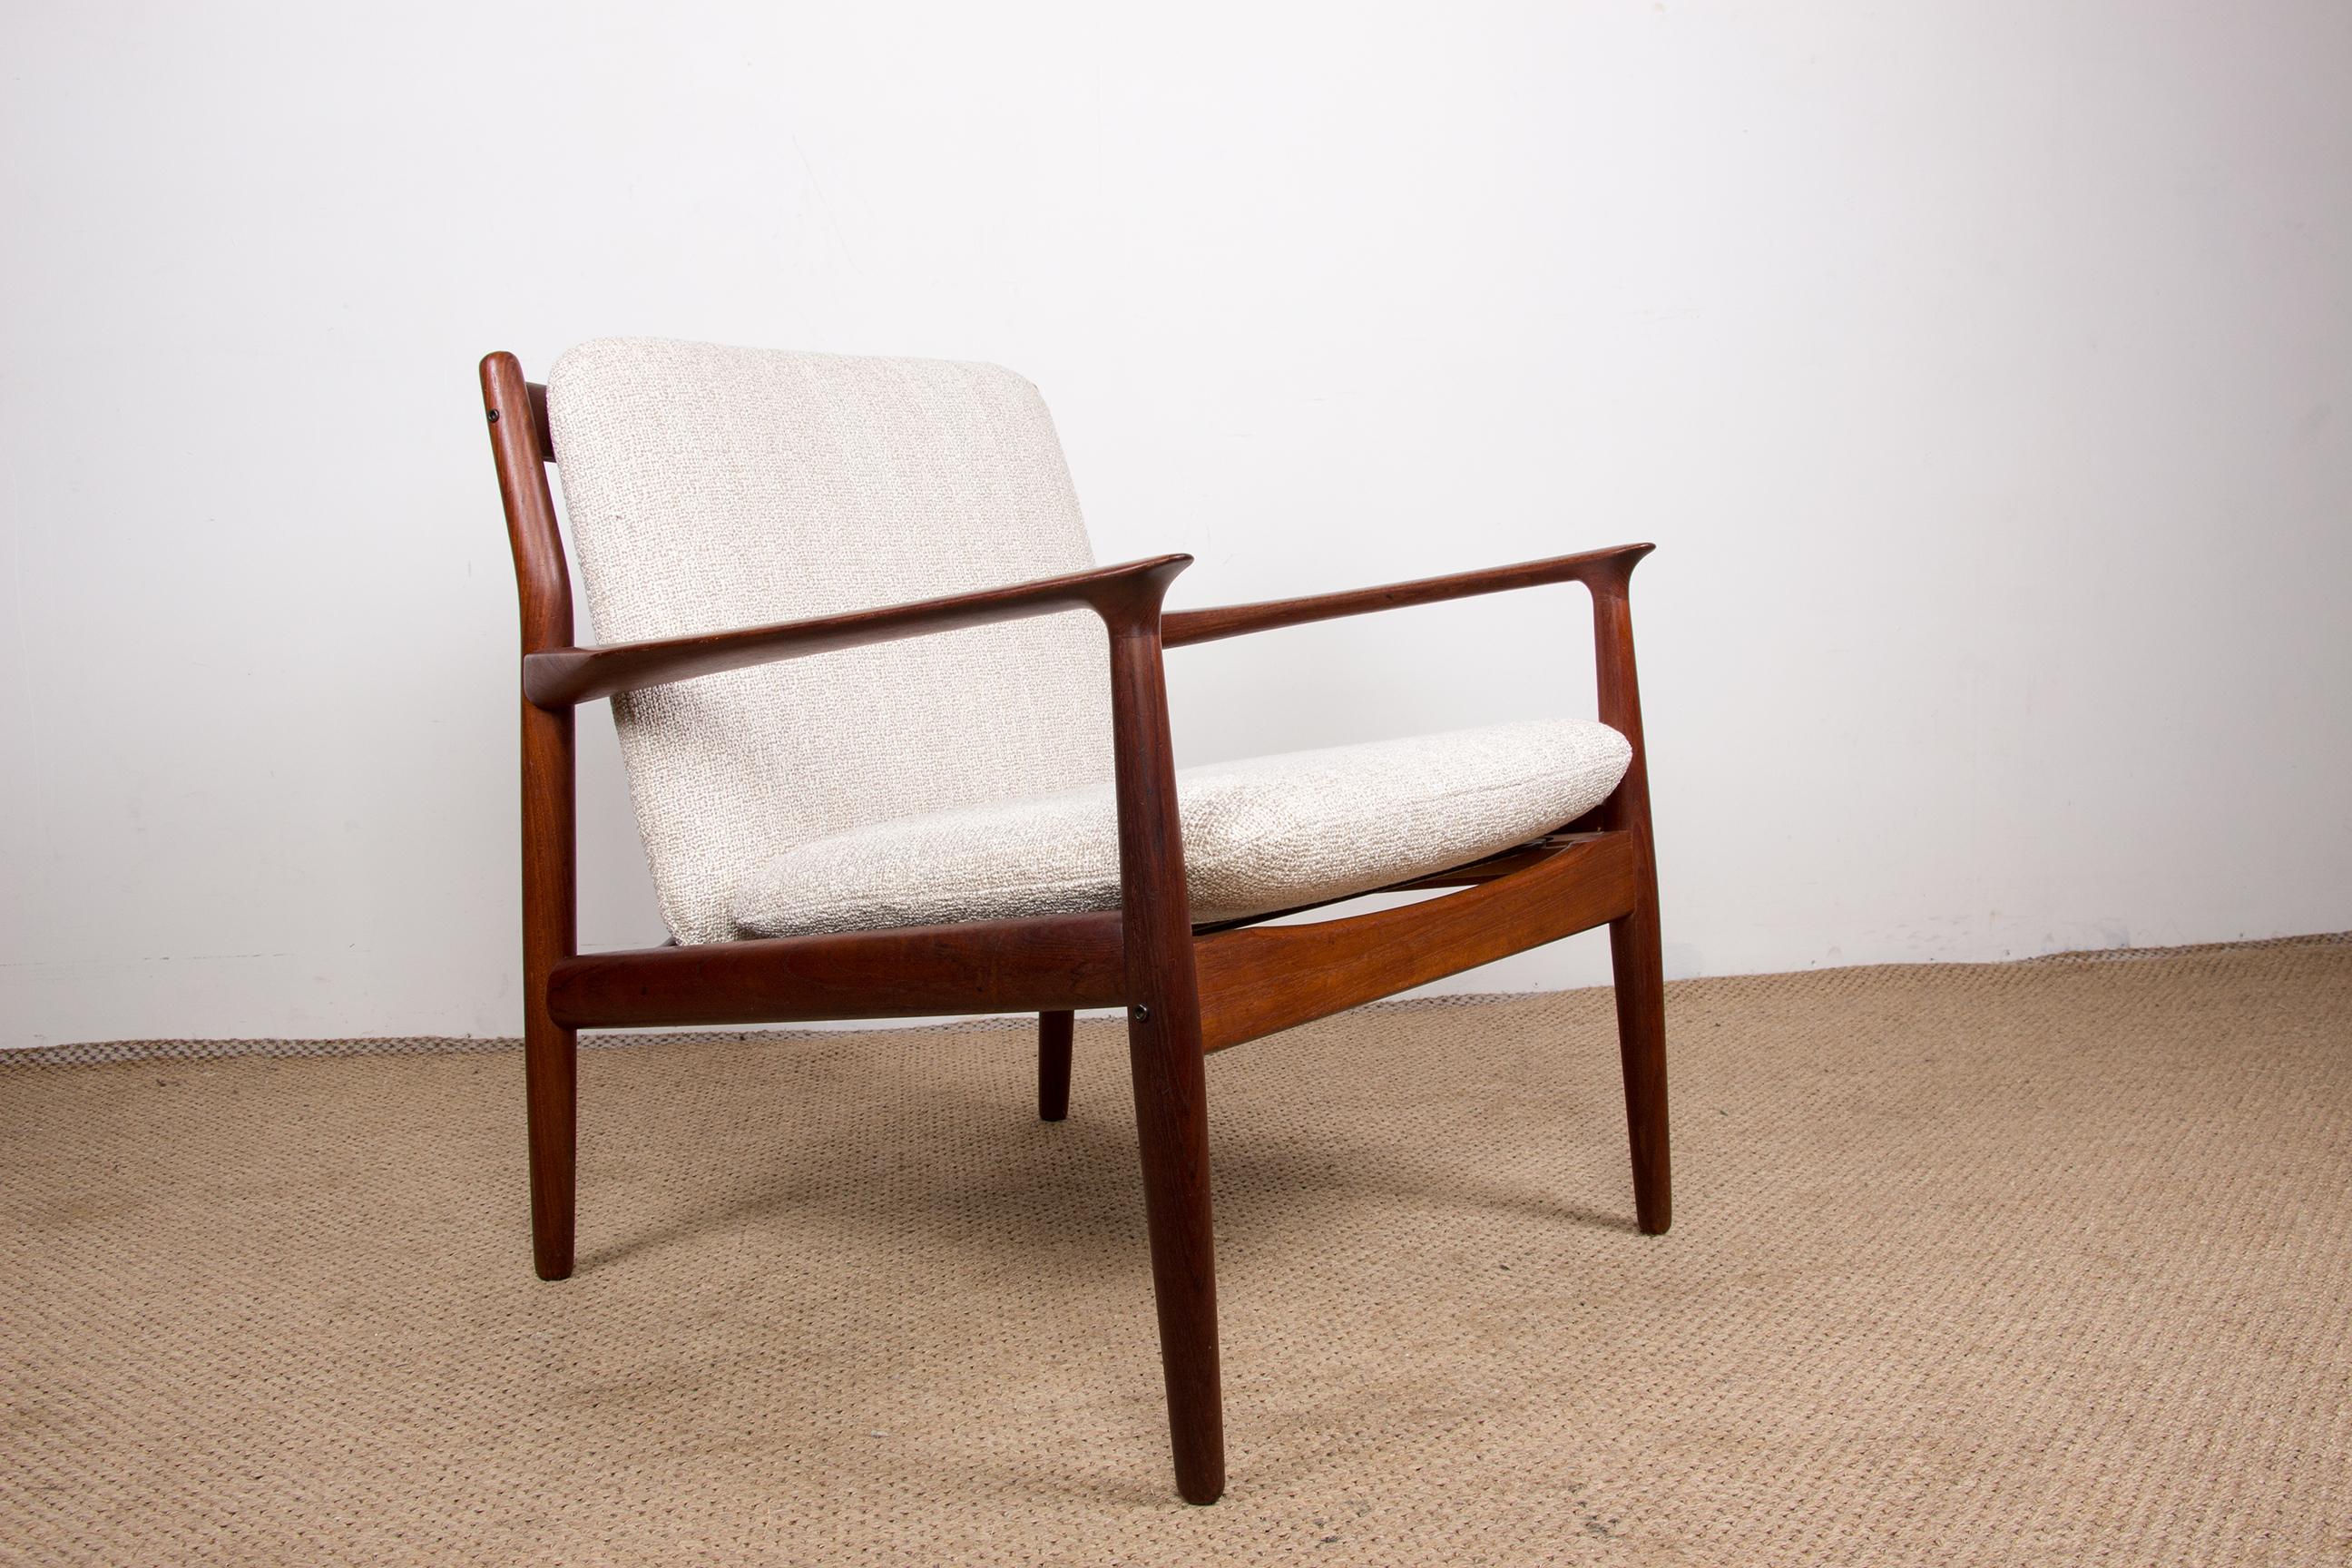 Pair of Danish Teak and New Bouclette Fabric Armchairs, by Svend Aage Eriksen 1